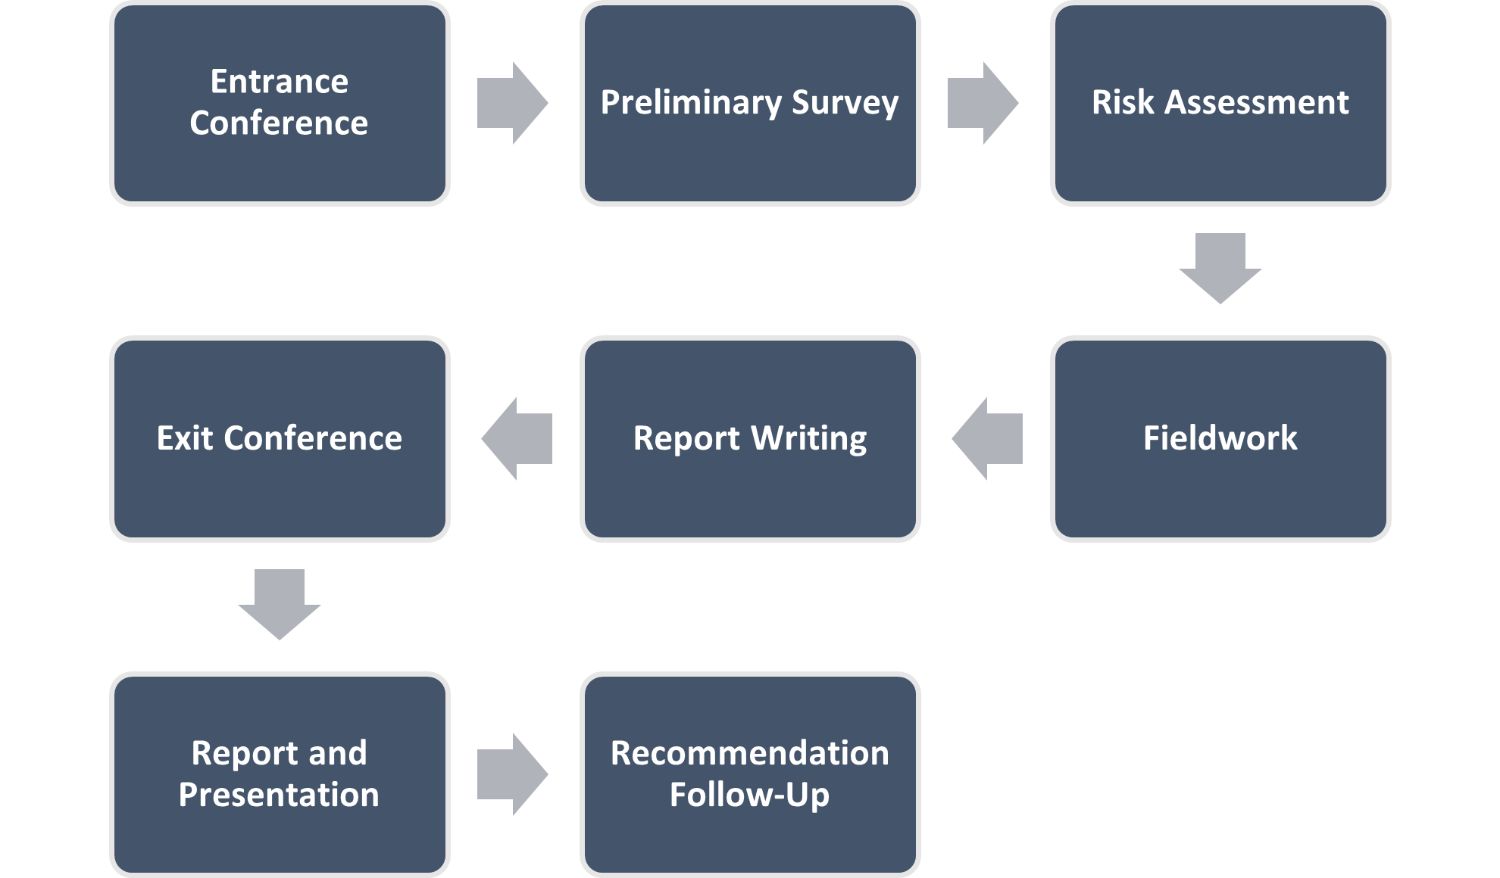 Flow chart depicting the audit process with the steps described in detail below. Step 1: Entrance Conference; Step 2: Preliminary Survey; Step 3: Risk Assessment; Step 4: Fieldwork; Step 5: Report Writing; Step 6: Exit Conference; Step 7: Report and Presentation; Step 8: Recommendation Follow-Up